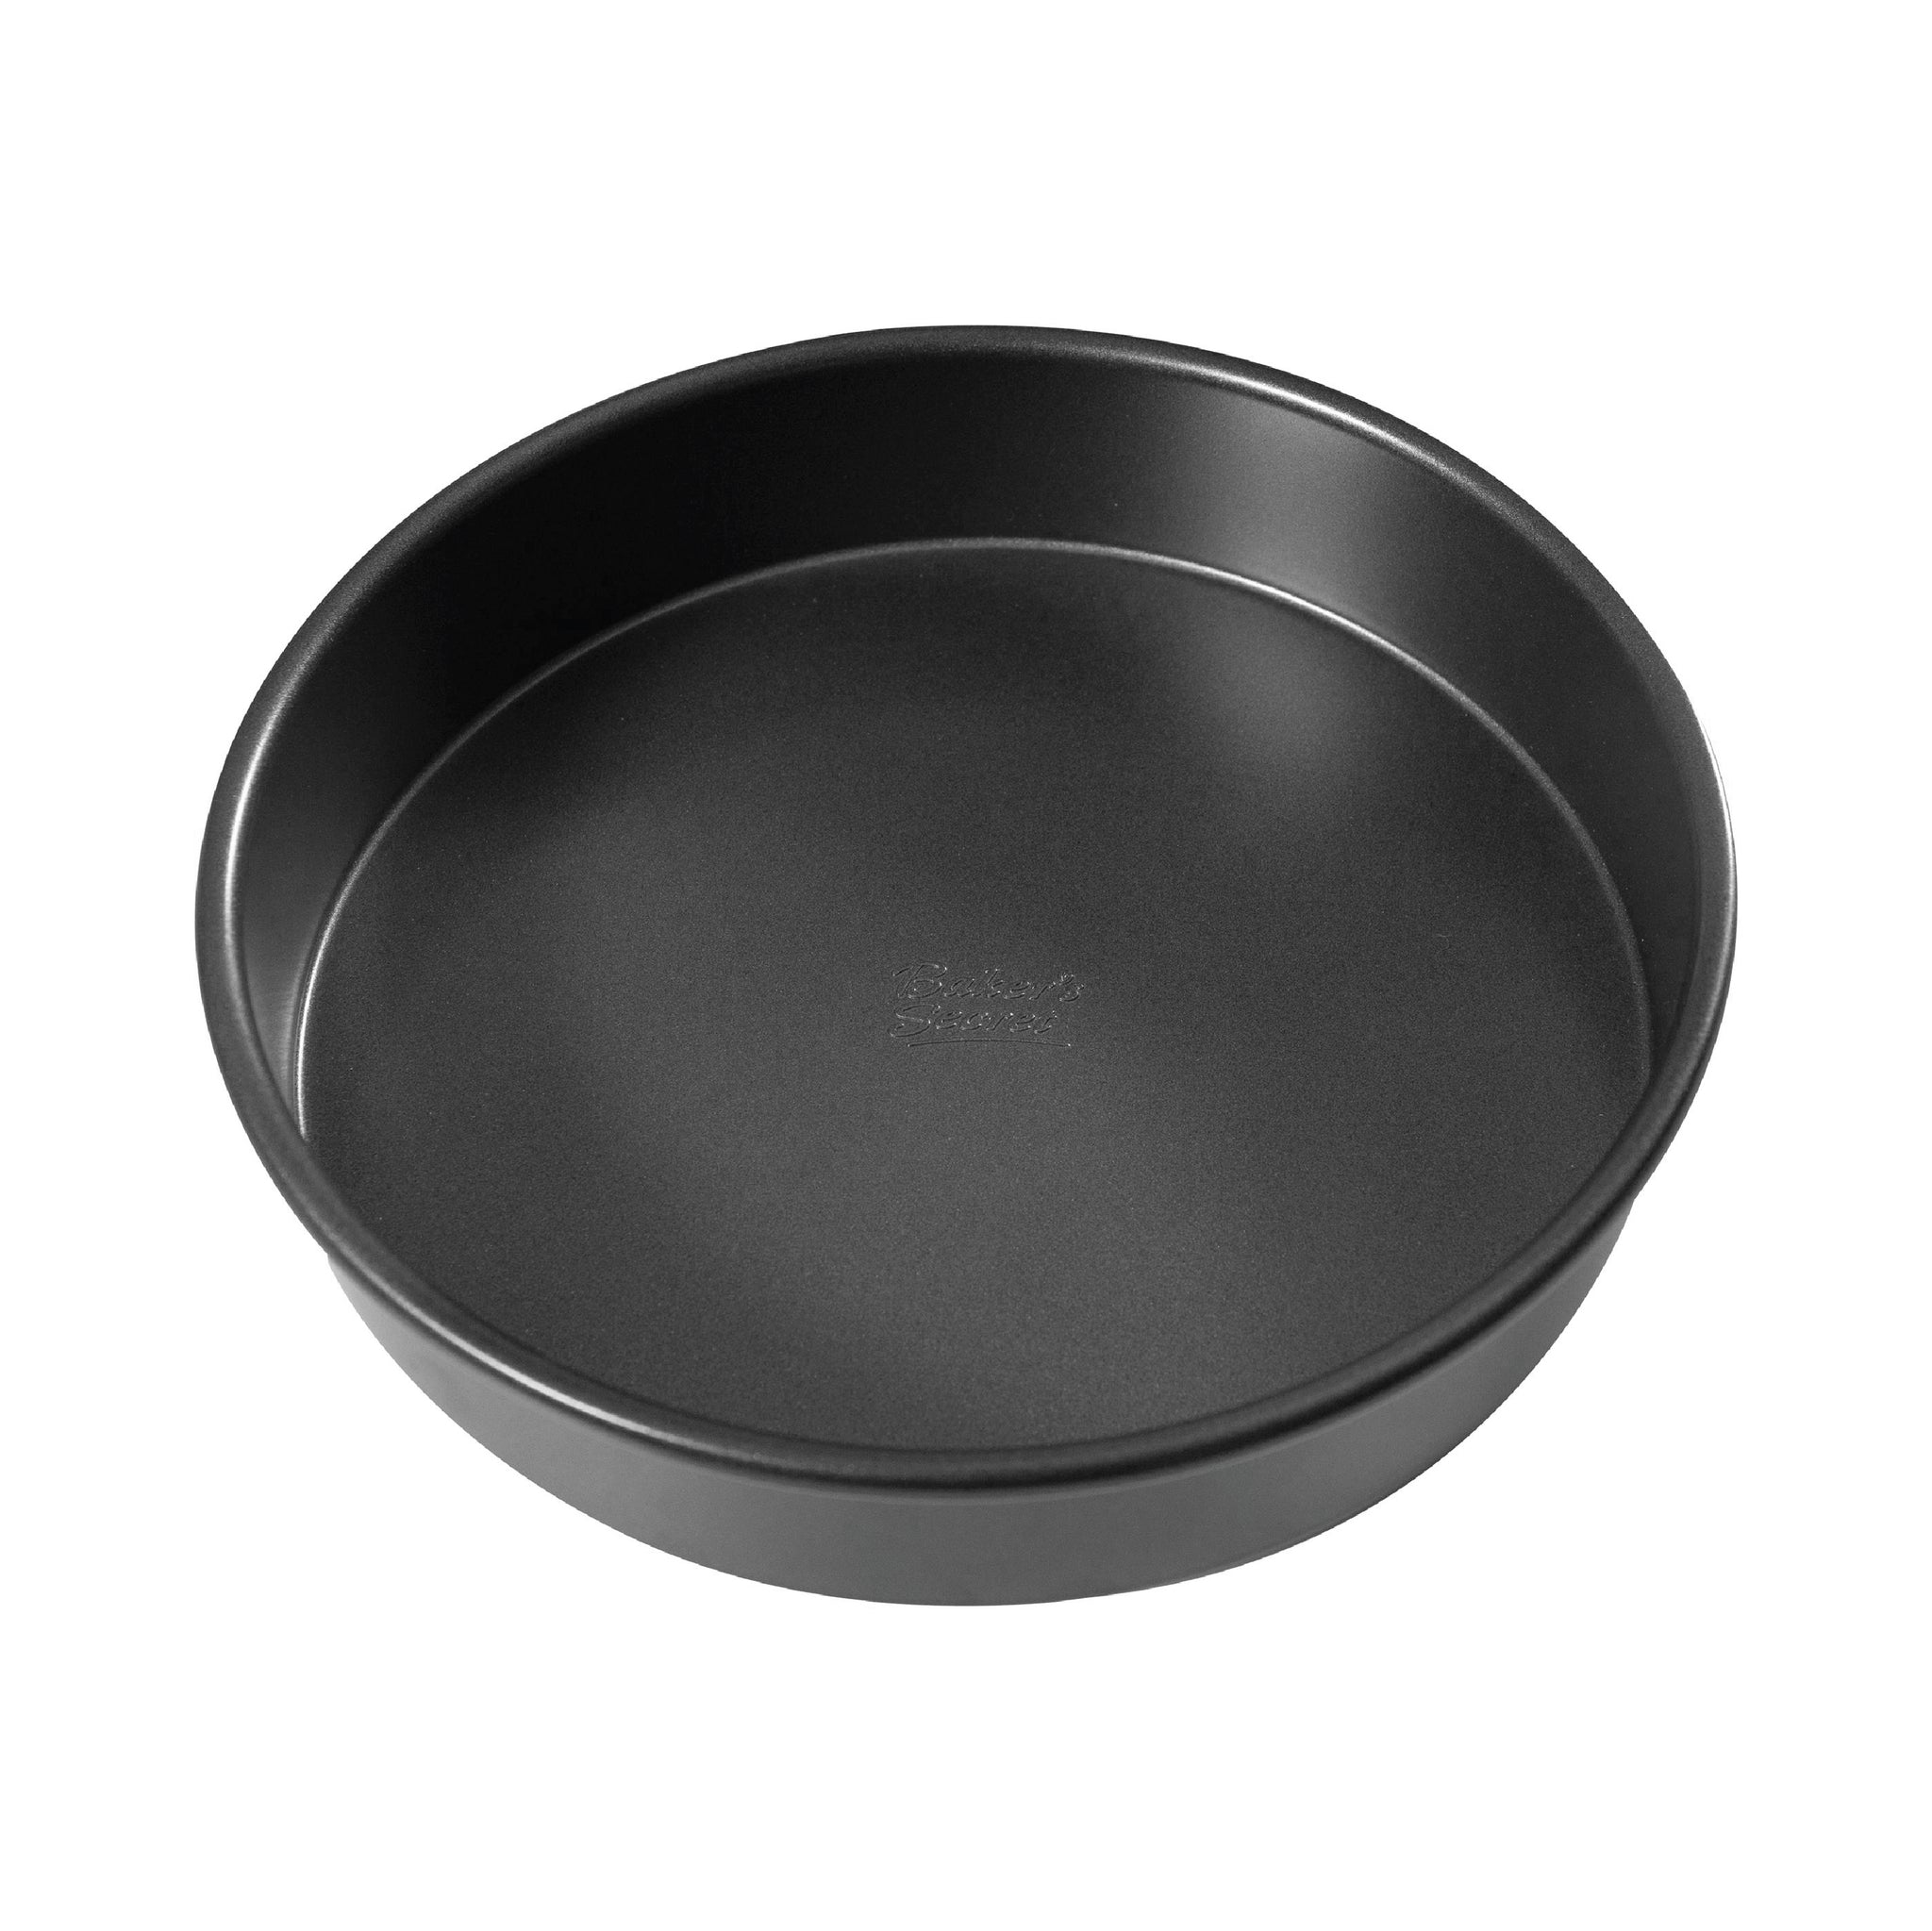 Hairy Bikers Kitchenware | 9-inch Spring Form Cake Pan